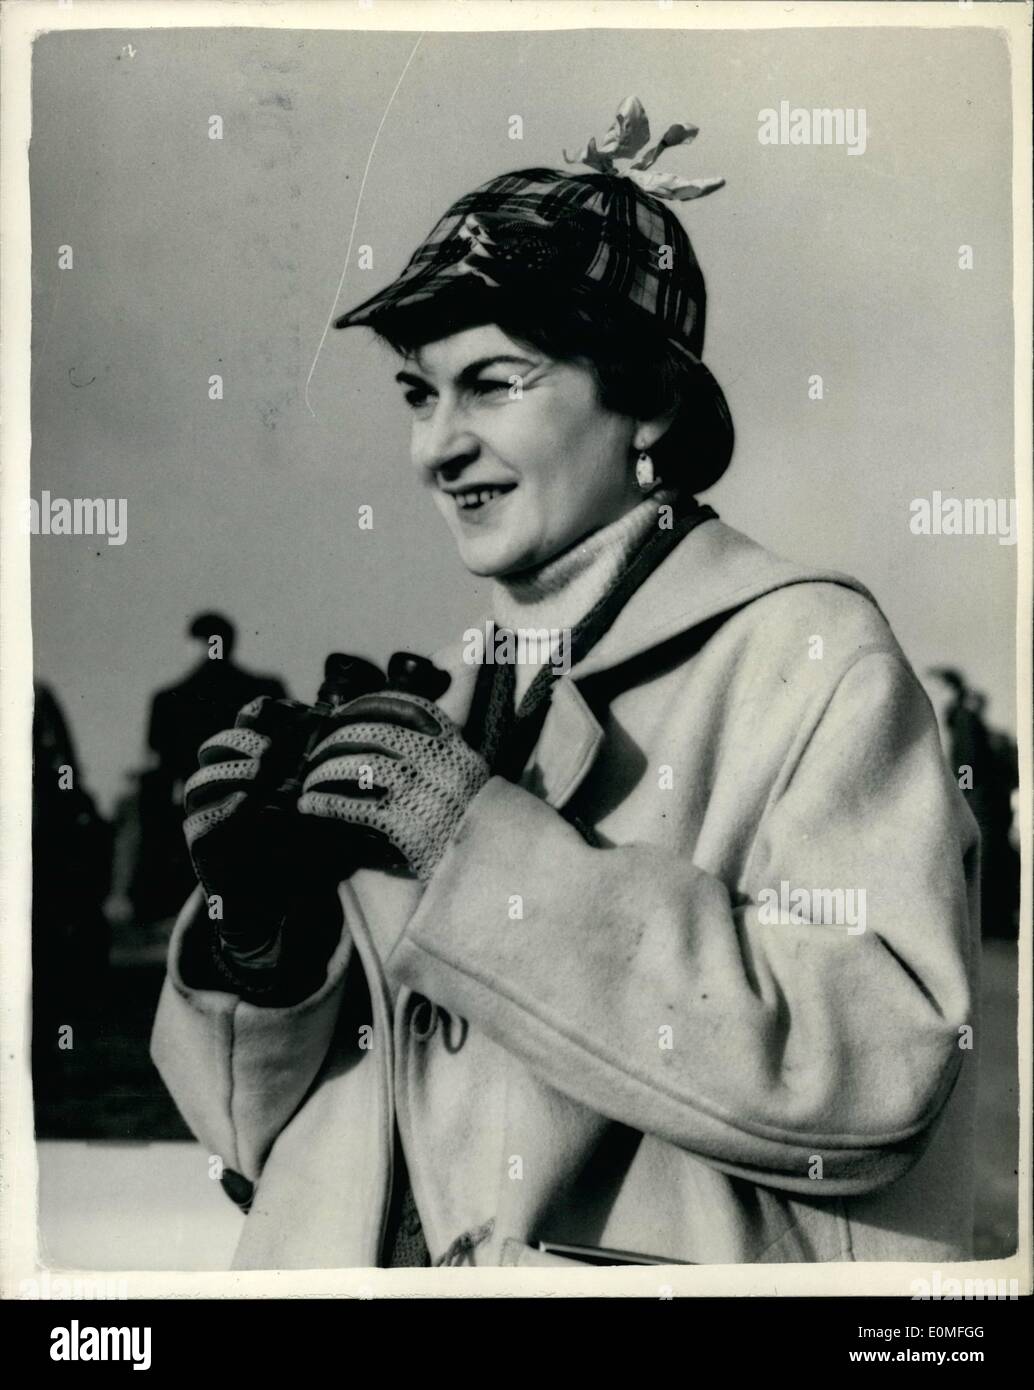 Dec. 12, 1954 - Boxing day car race meeting at brands hatch. The lady with the deer-stalker hat. Photo shows Diana Aley of Cambridge wears a deer - stalker hat in Scottish Tartan and earrings of the Bugutti car radiator - an a duffle coat - during the Boxing day car race meeting at Brands hats today. Stock Photo